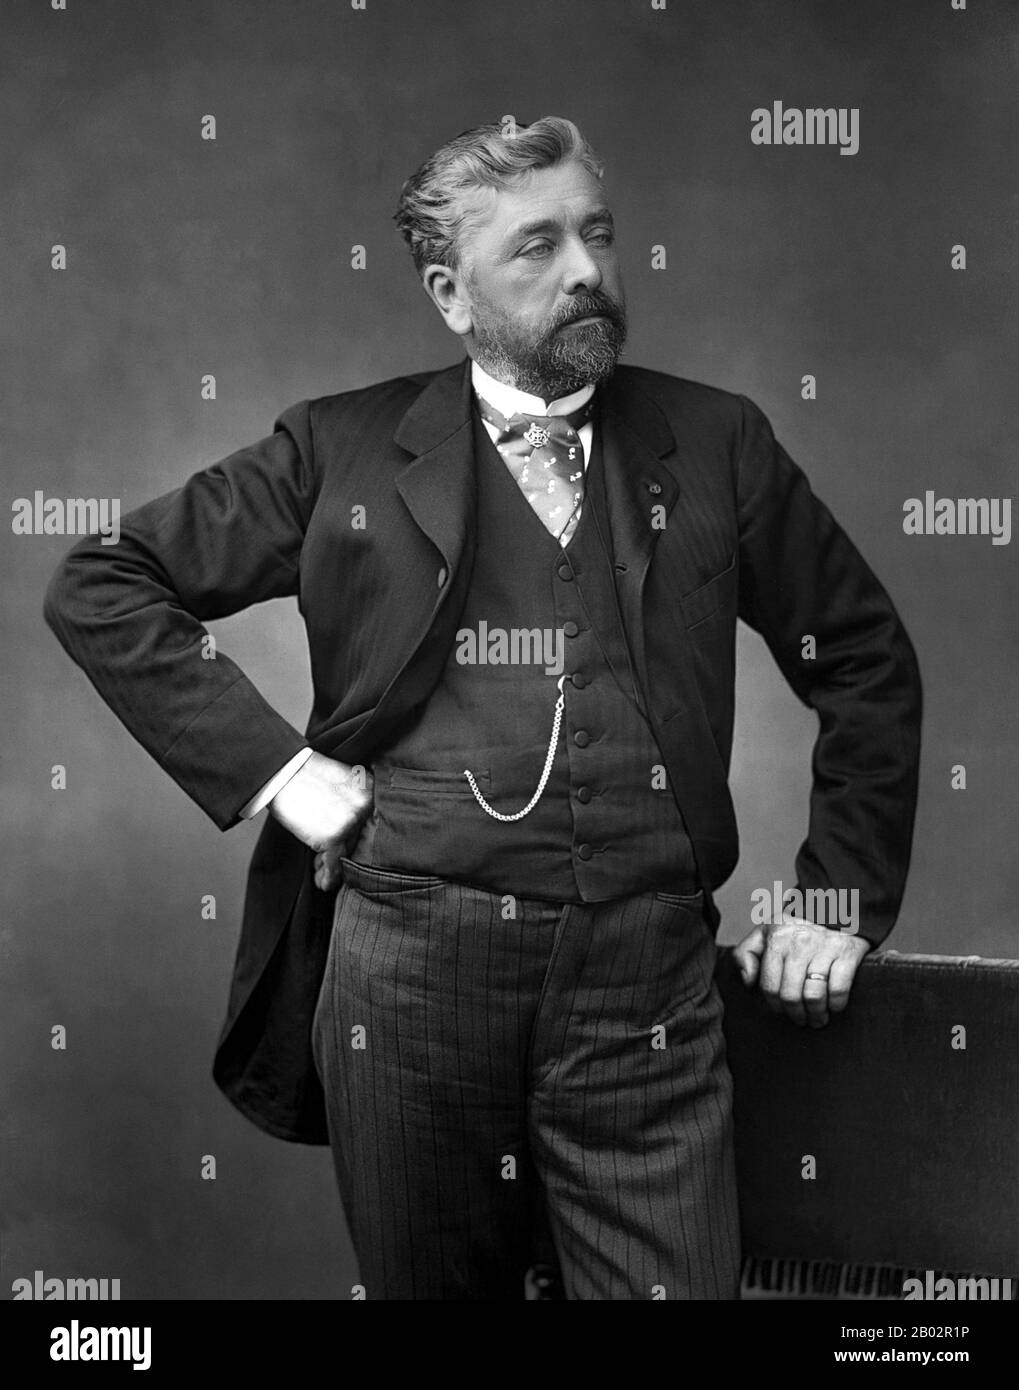 Alexandre Gustave Eiffel (born Bönickhausen, 15 December 1832 – 27 December 1923) was a French civil engineer and architect. A graduate of the École Centrale des Arts et Manufactures, he made his name with various bridges for the French railway network, most famously the Garabit viaduct.  He is best known for the world-famous Eiffel Tower, built for the 1889 Universal Exposition in Paris, France. After his retirement from engineering, Eiffel concentrated his energies on research into meteorology and aerodynamics, making important contributions in both fields.  Eiffel's best-known works in Asia Stock Photo